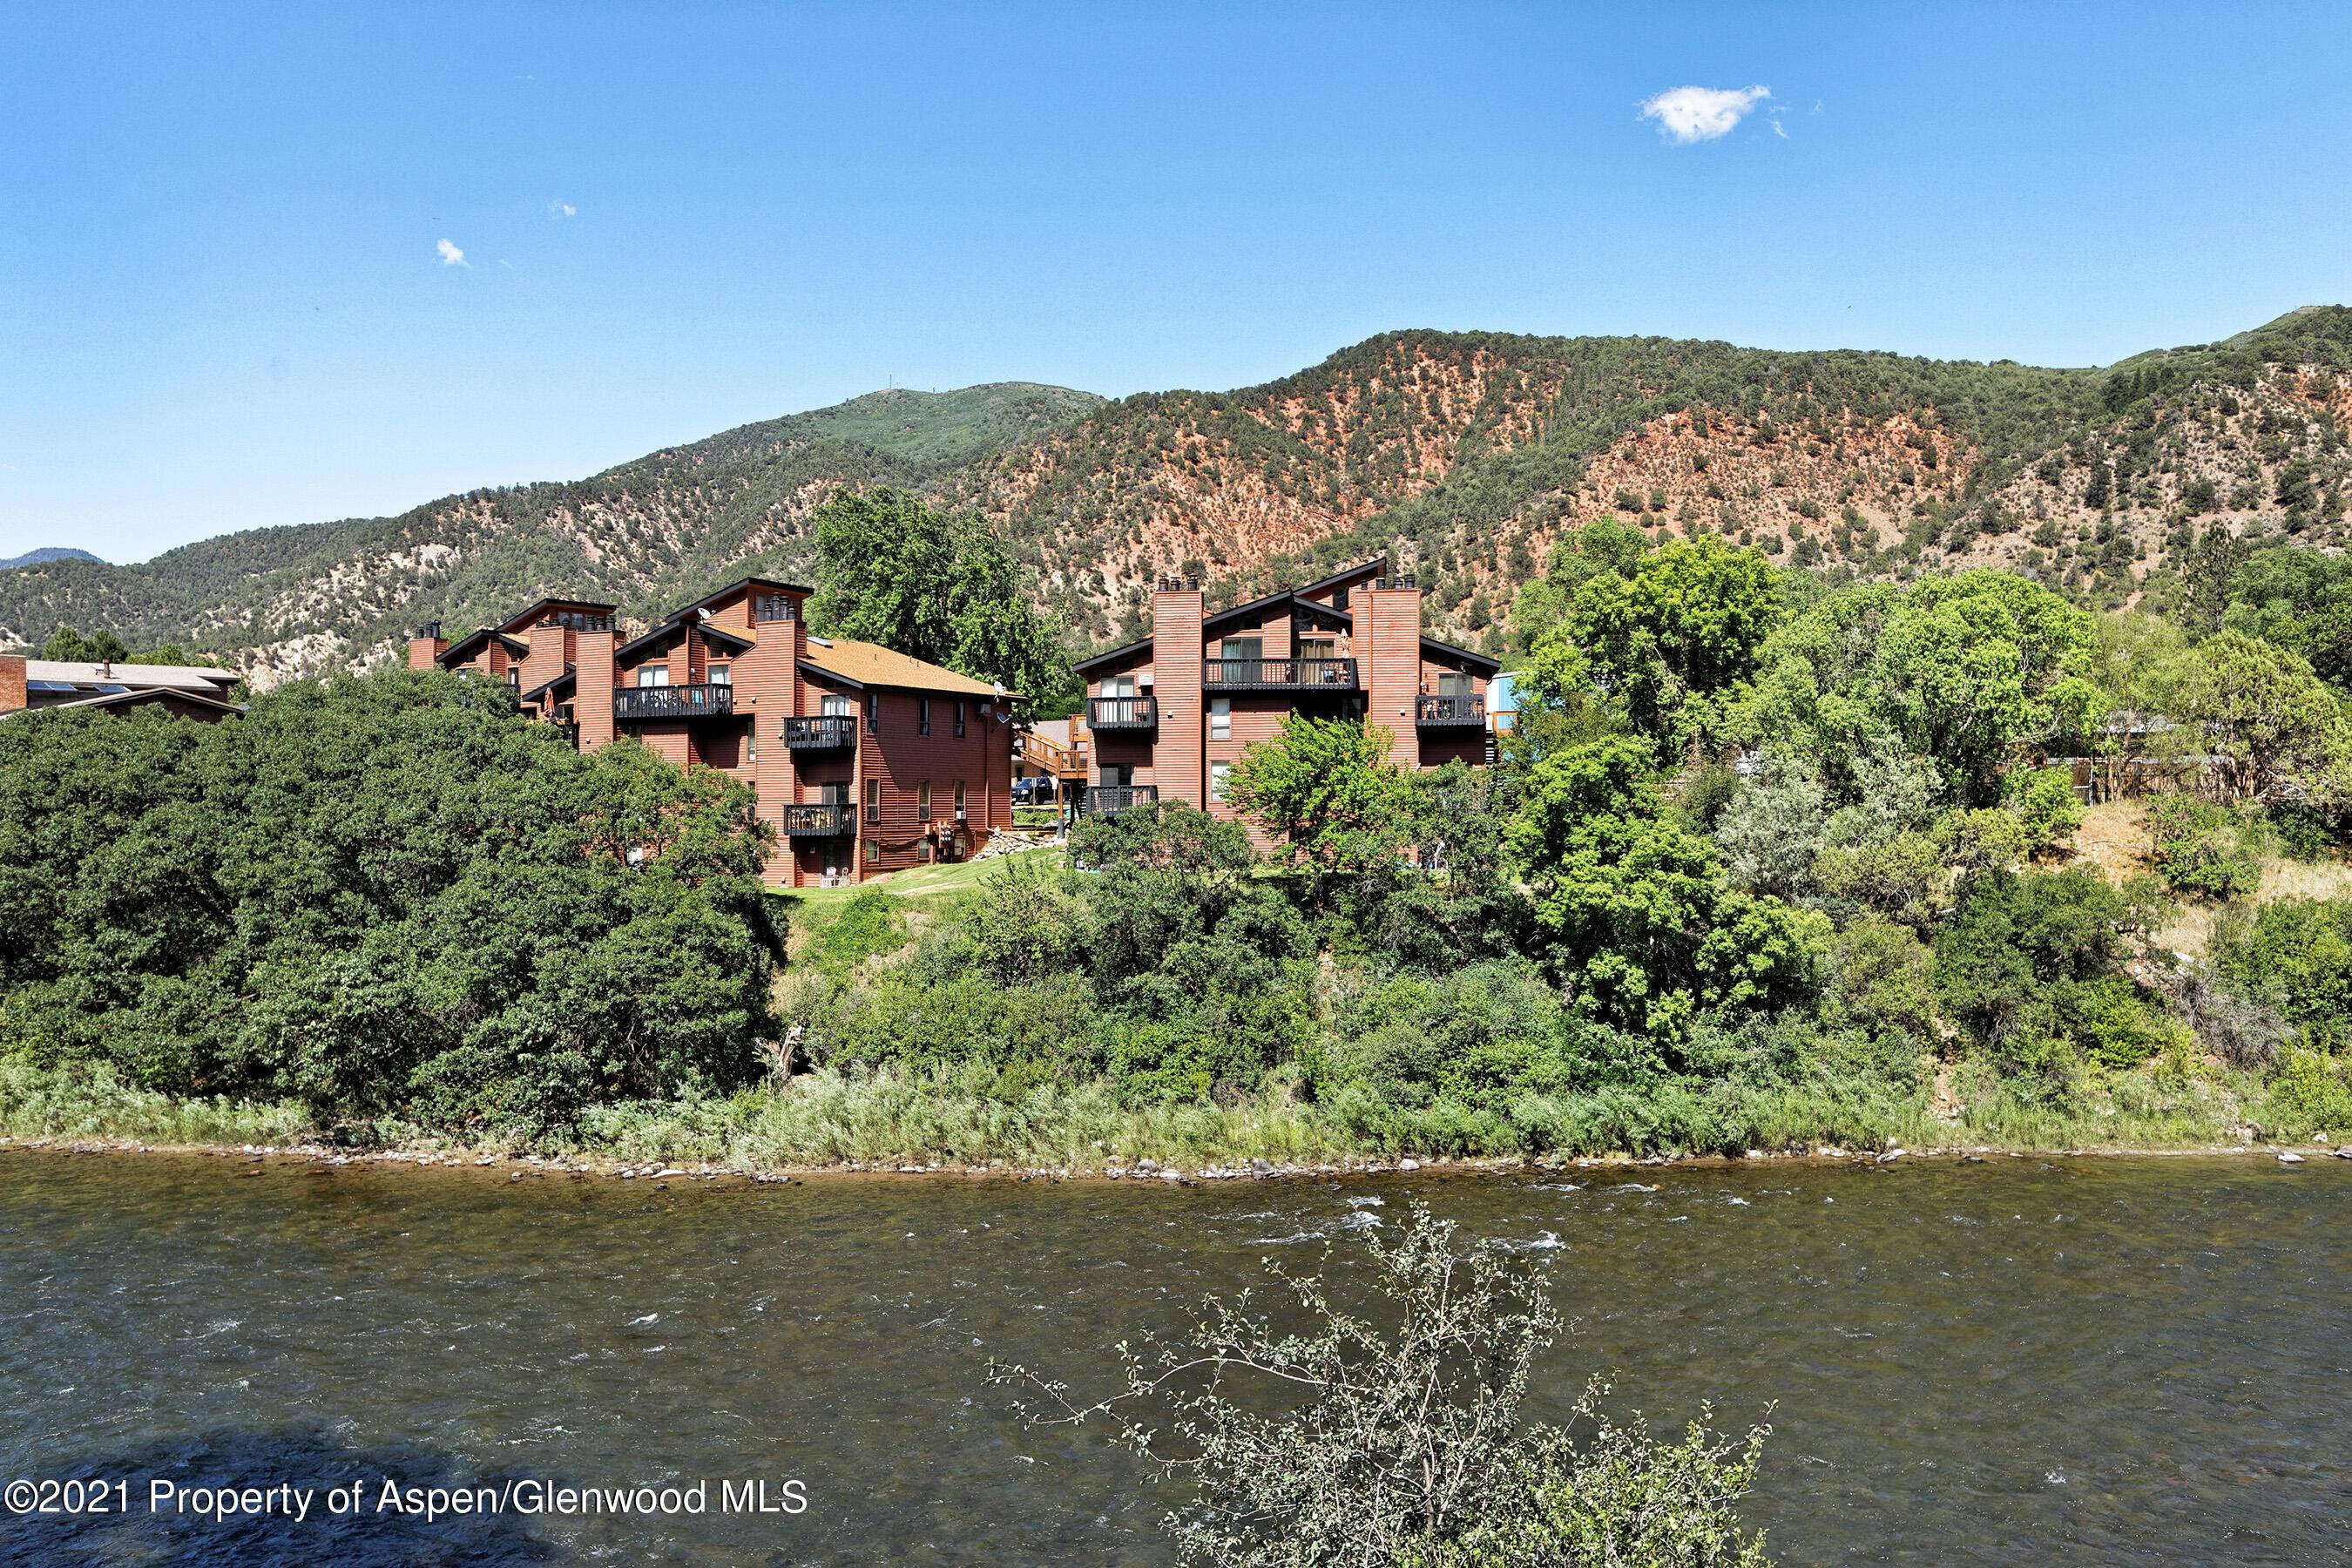 Condo on the Roaring Fork River.